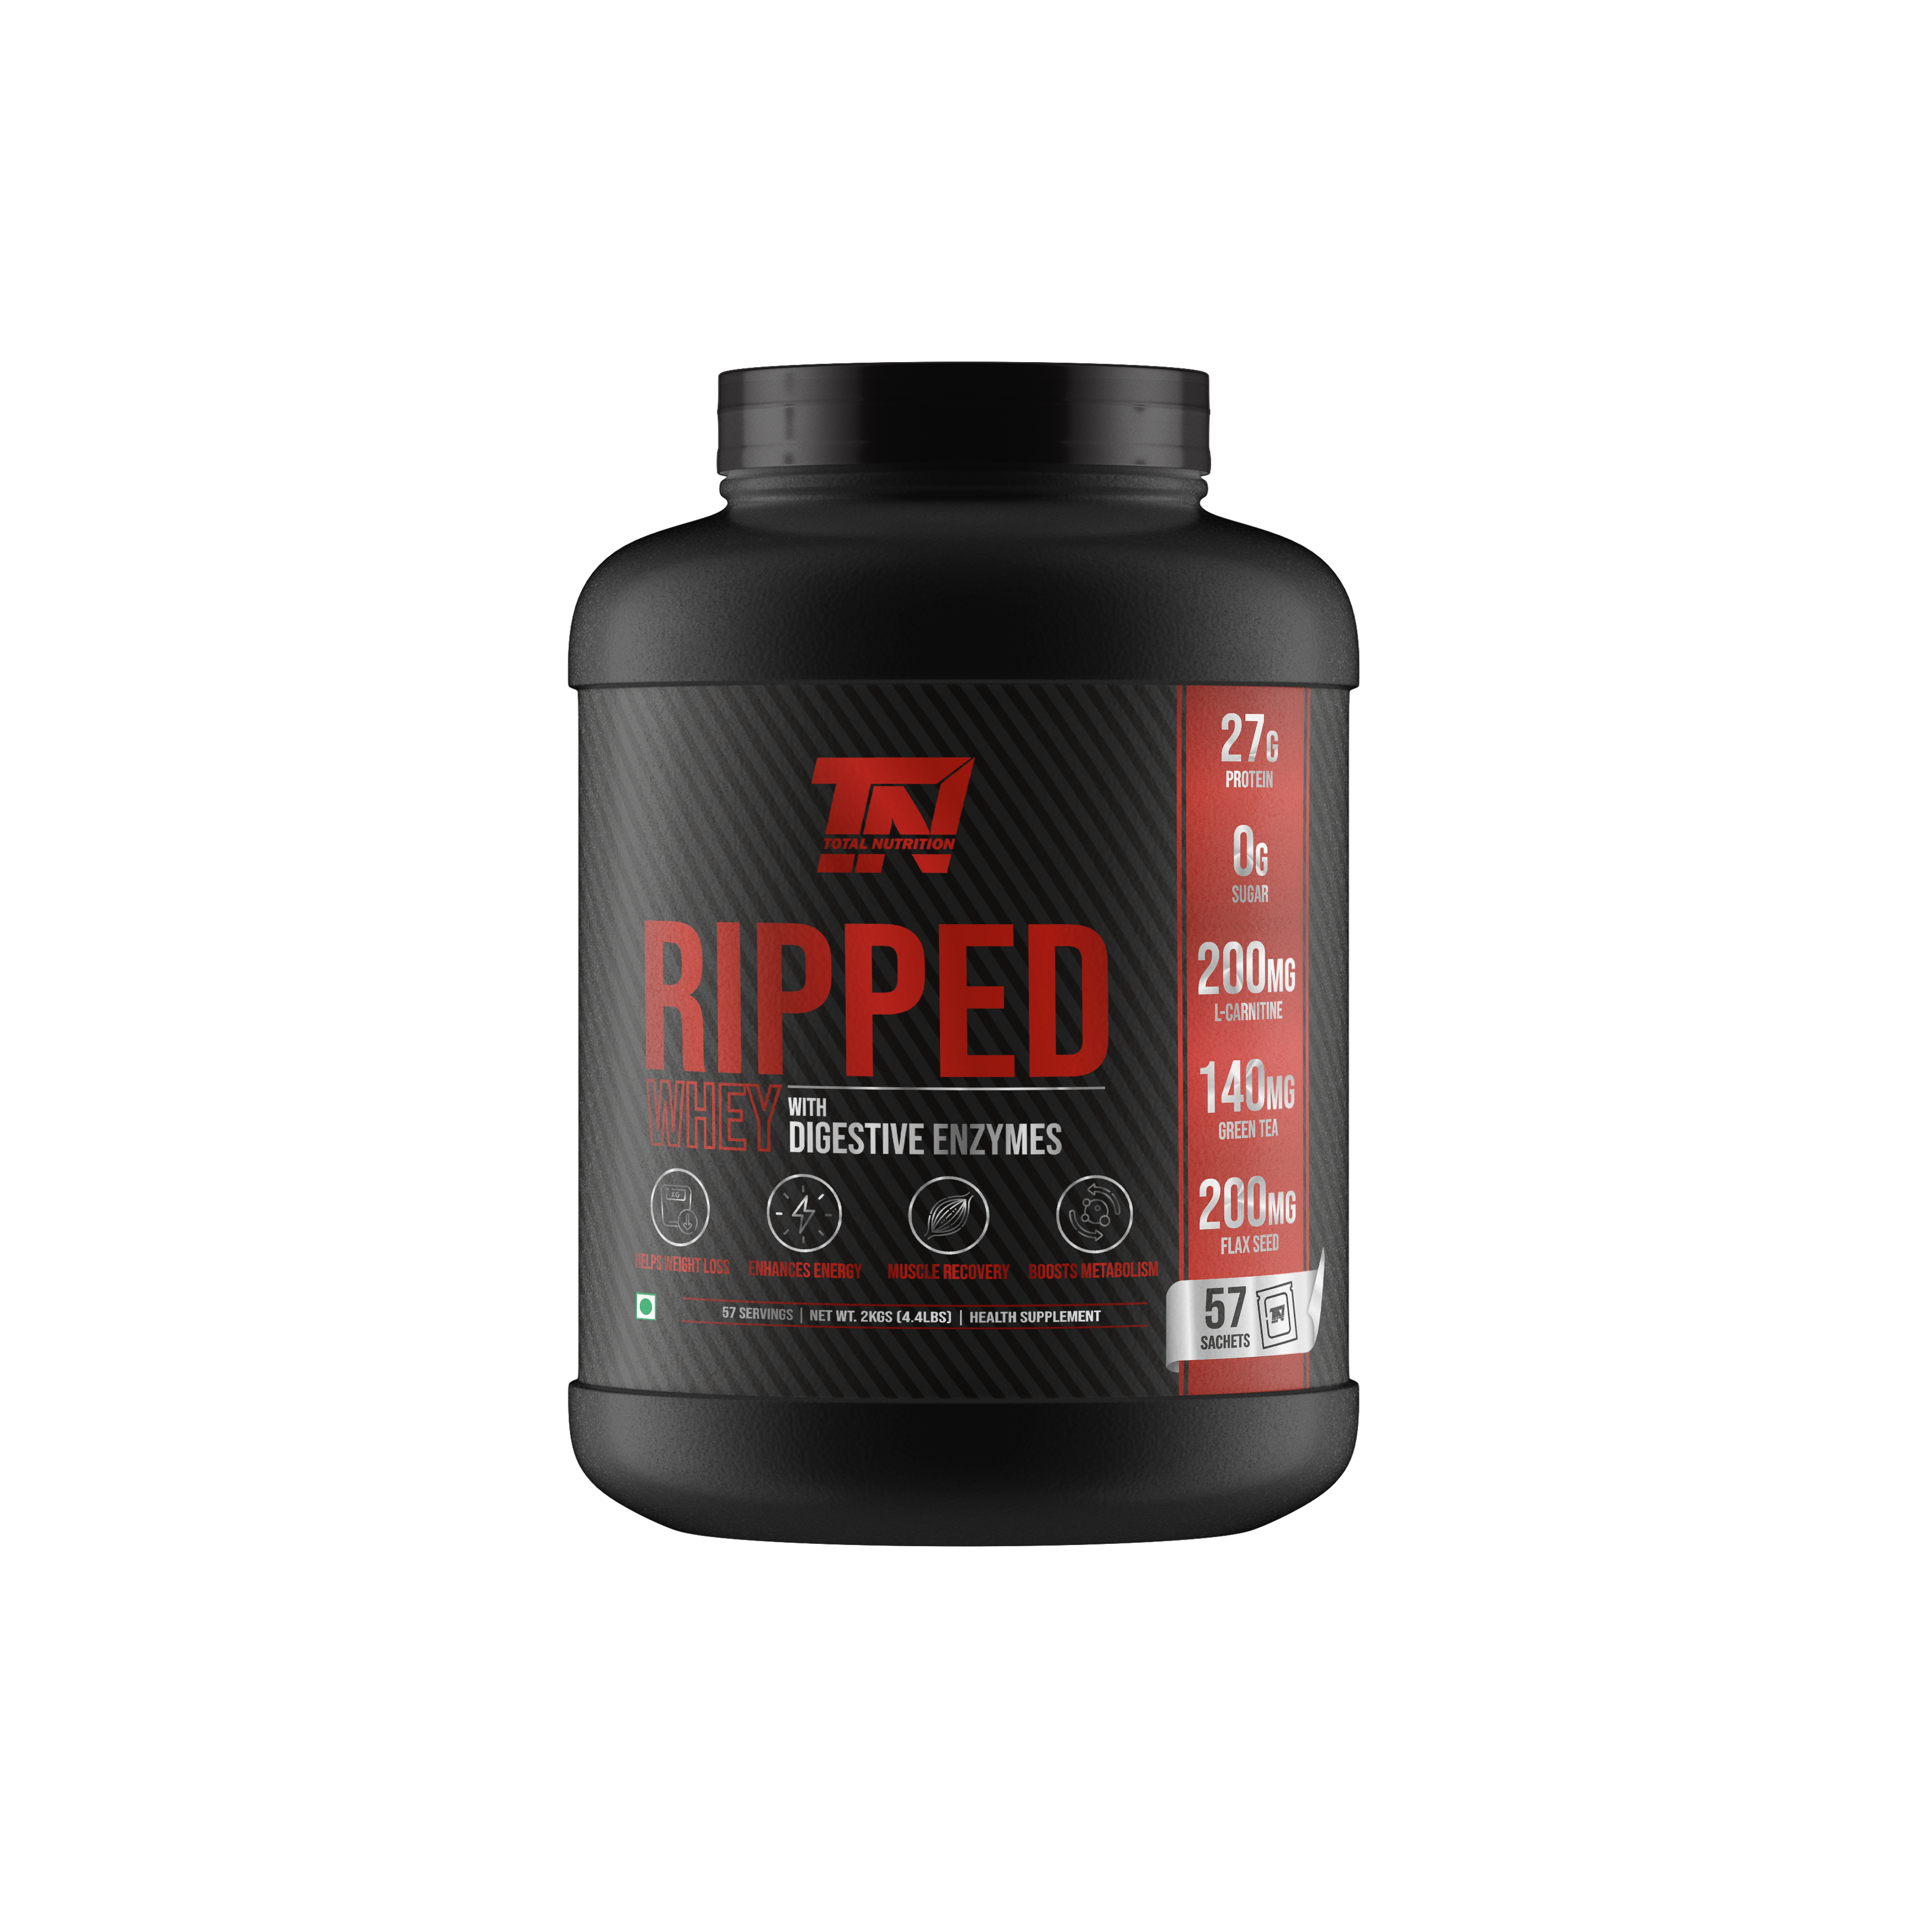 Total Nutrition Ripped Whey Protein